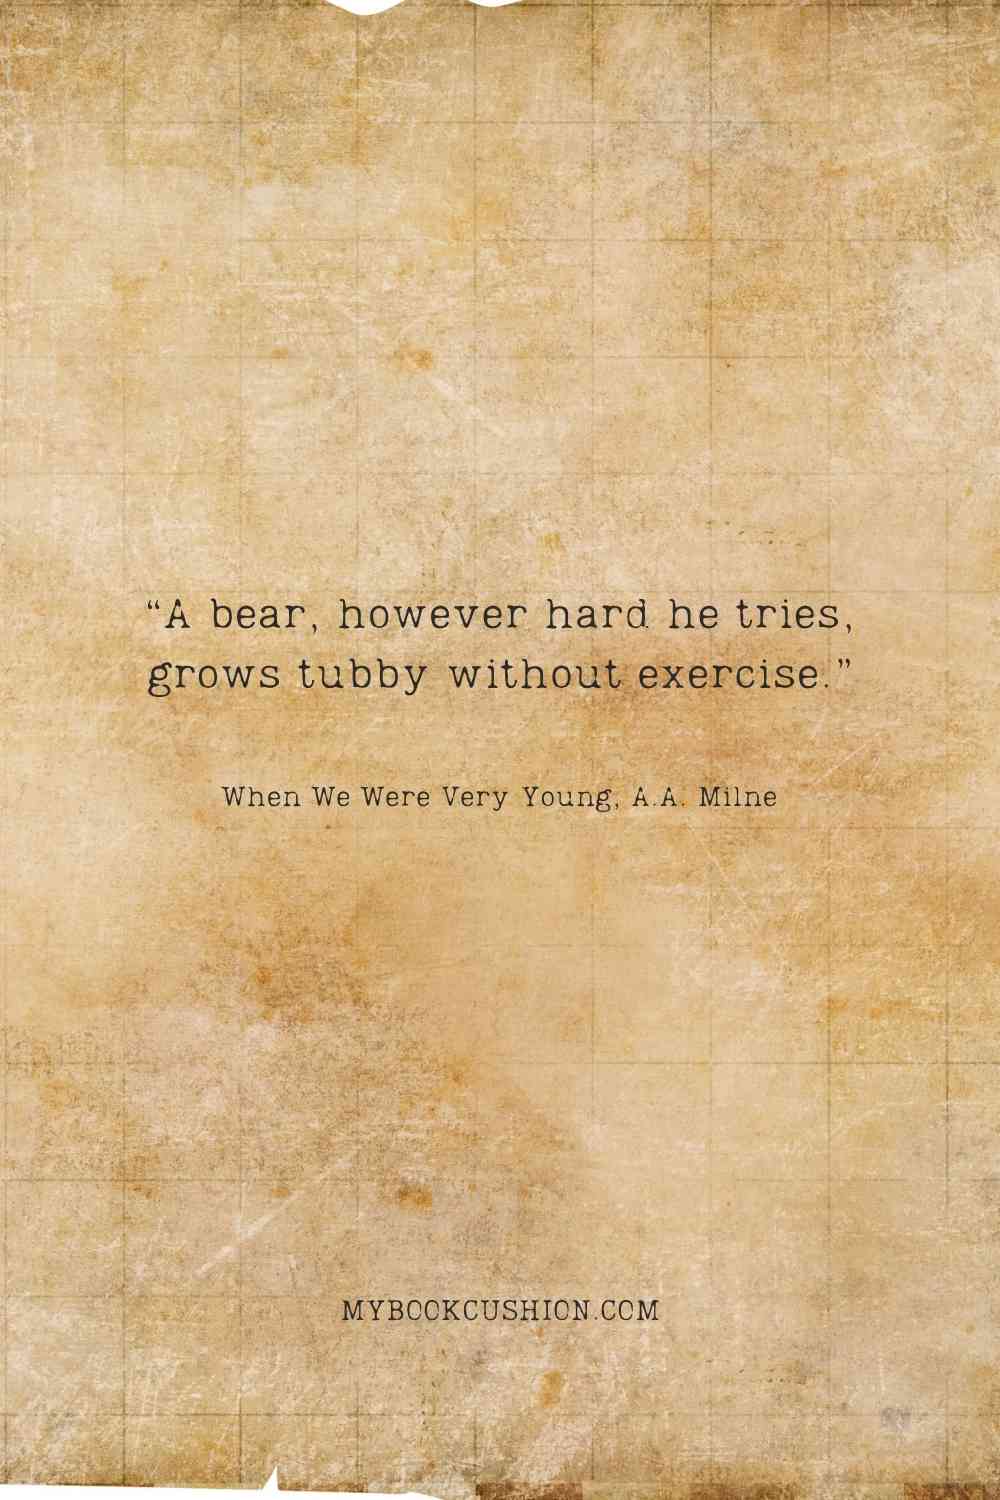 “A bear, however hard he tries, grows tubby without exercise.” - When We Were Very Young, A.A. Milne